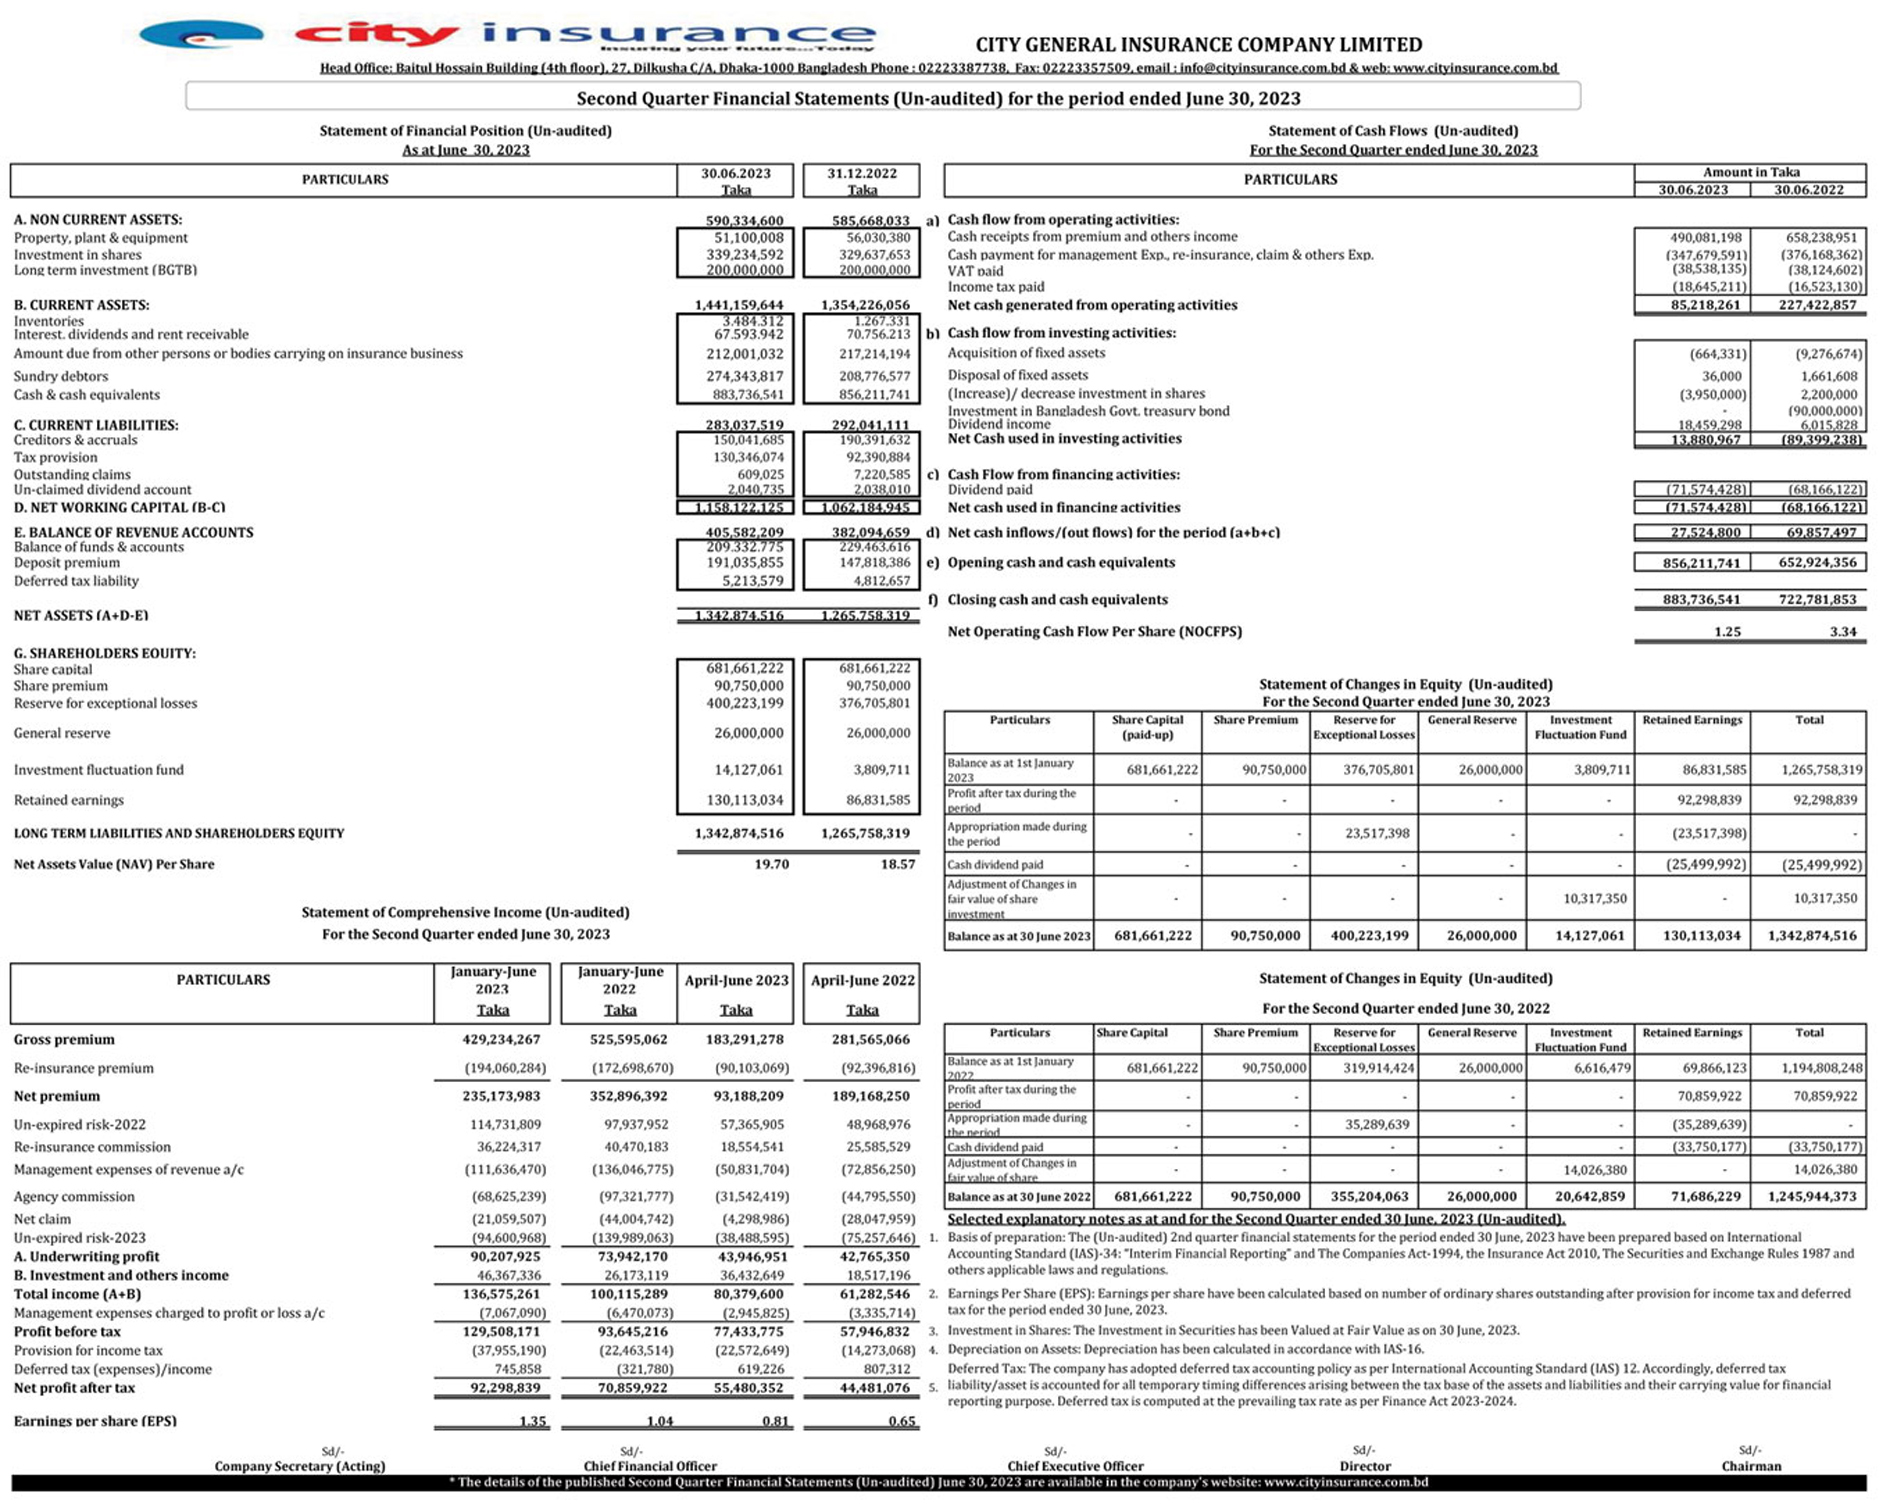 2nd Quarter Un-audited Financial Statements (April 2023 – June 2023) of City General Insurance Company Limited 